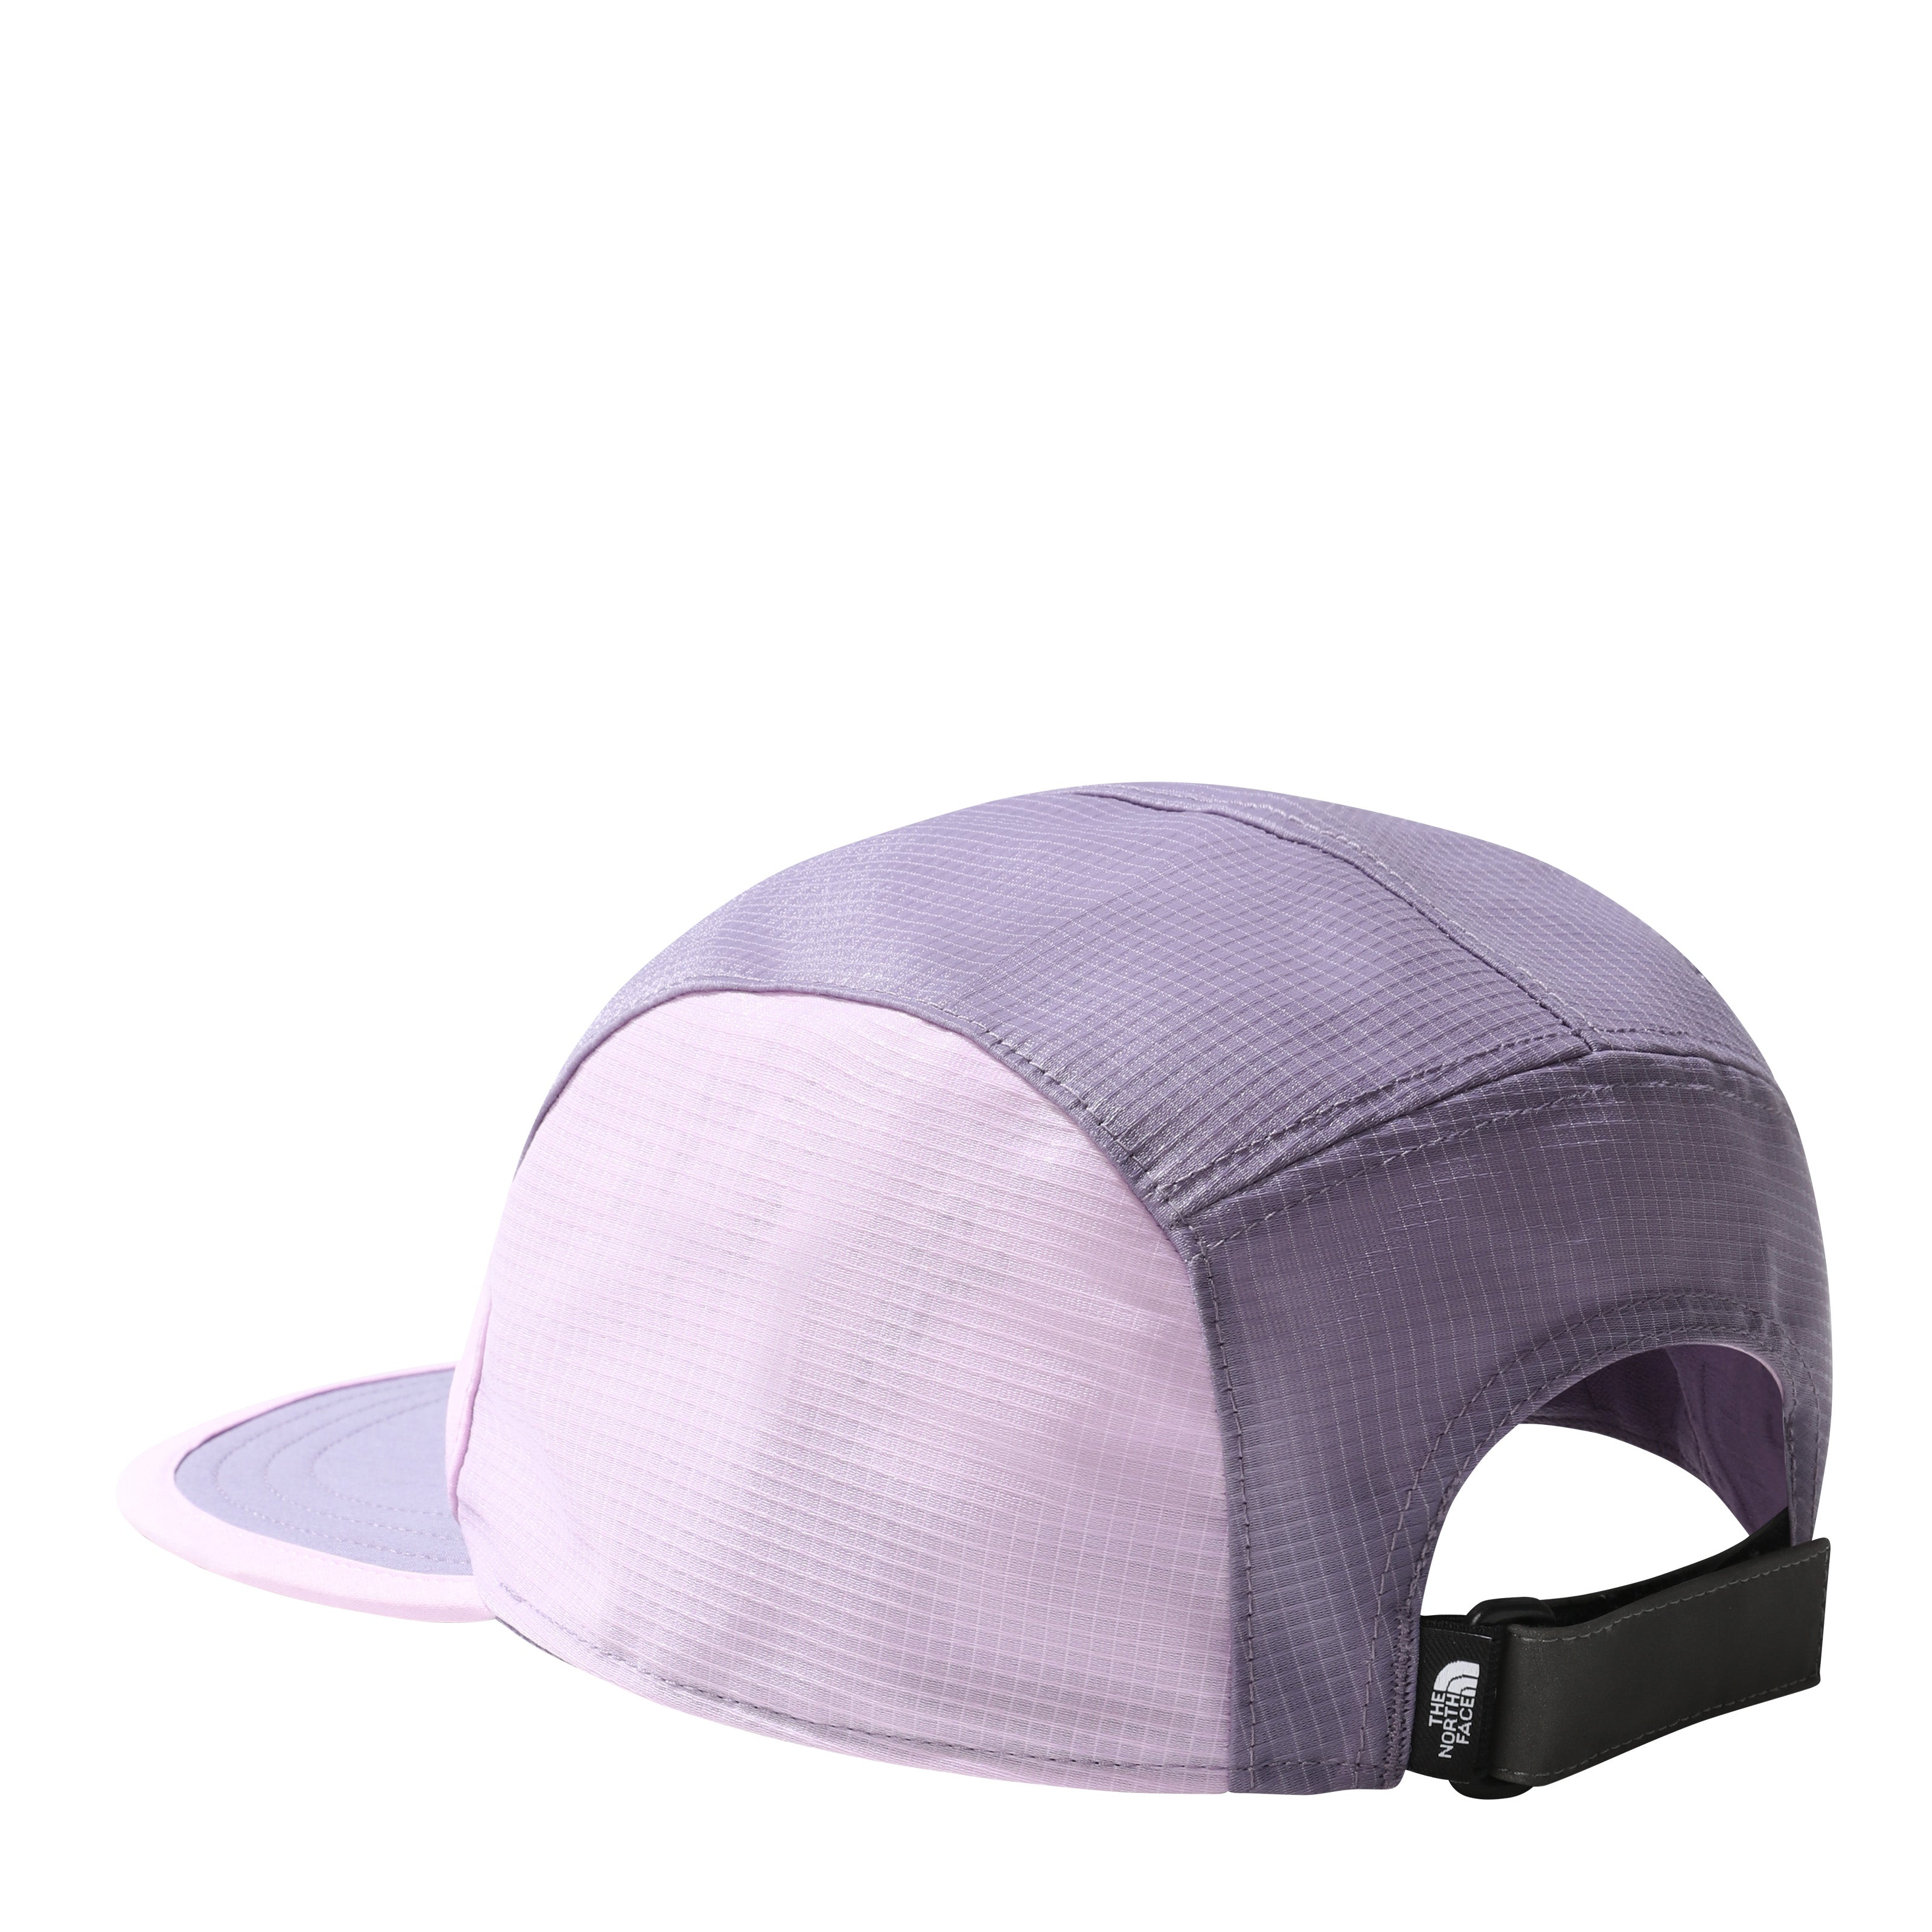 THE NORTH FACE RUN HAT